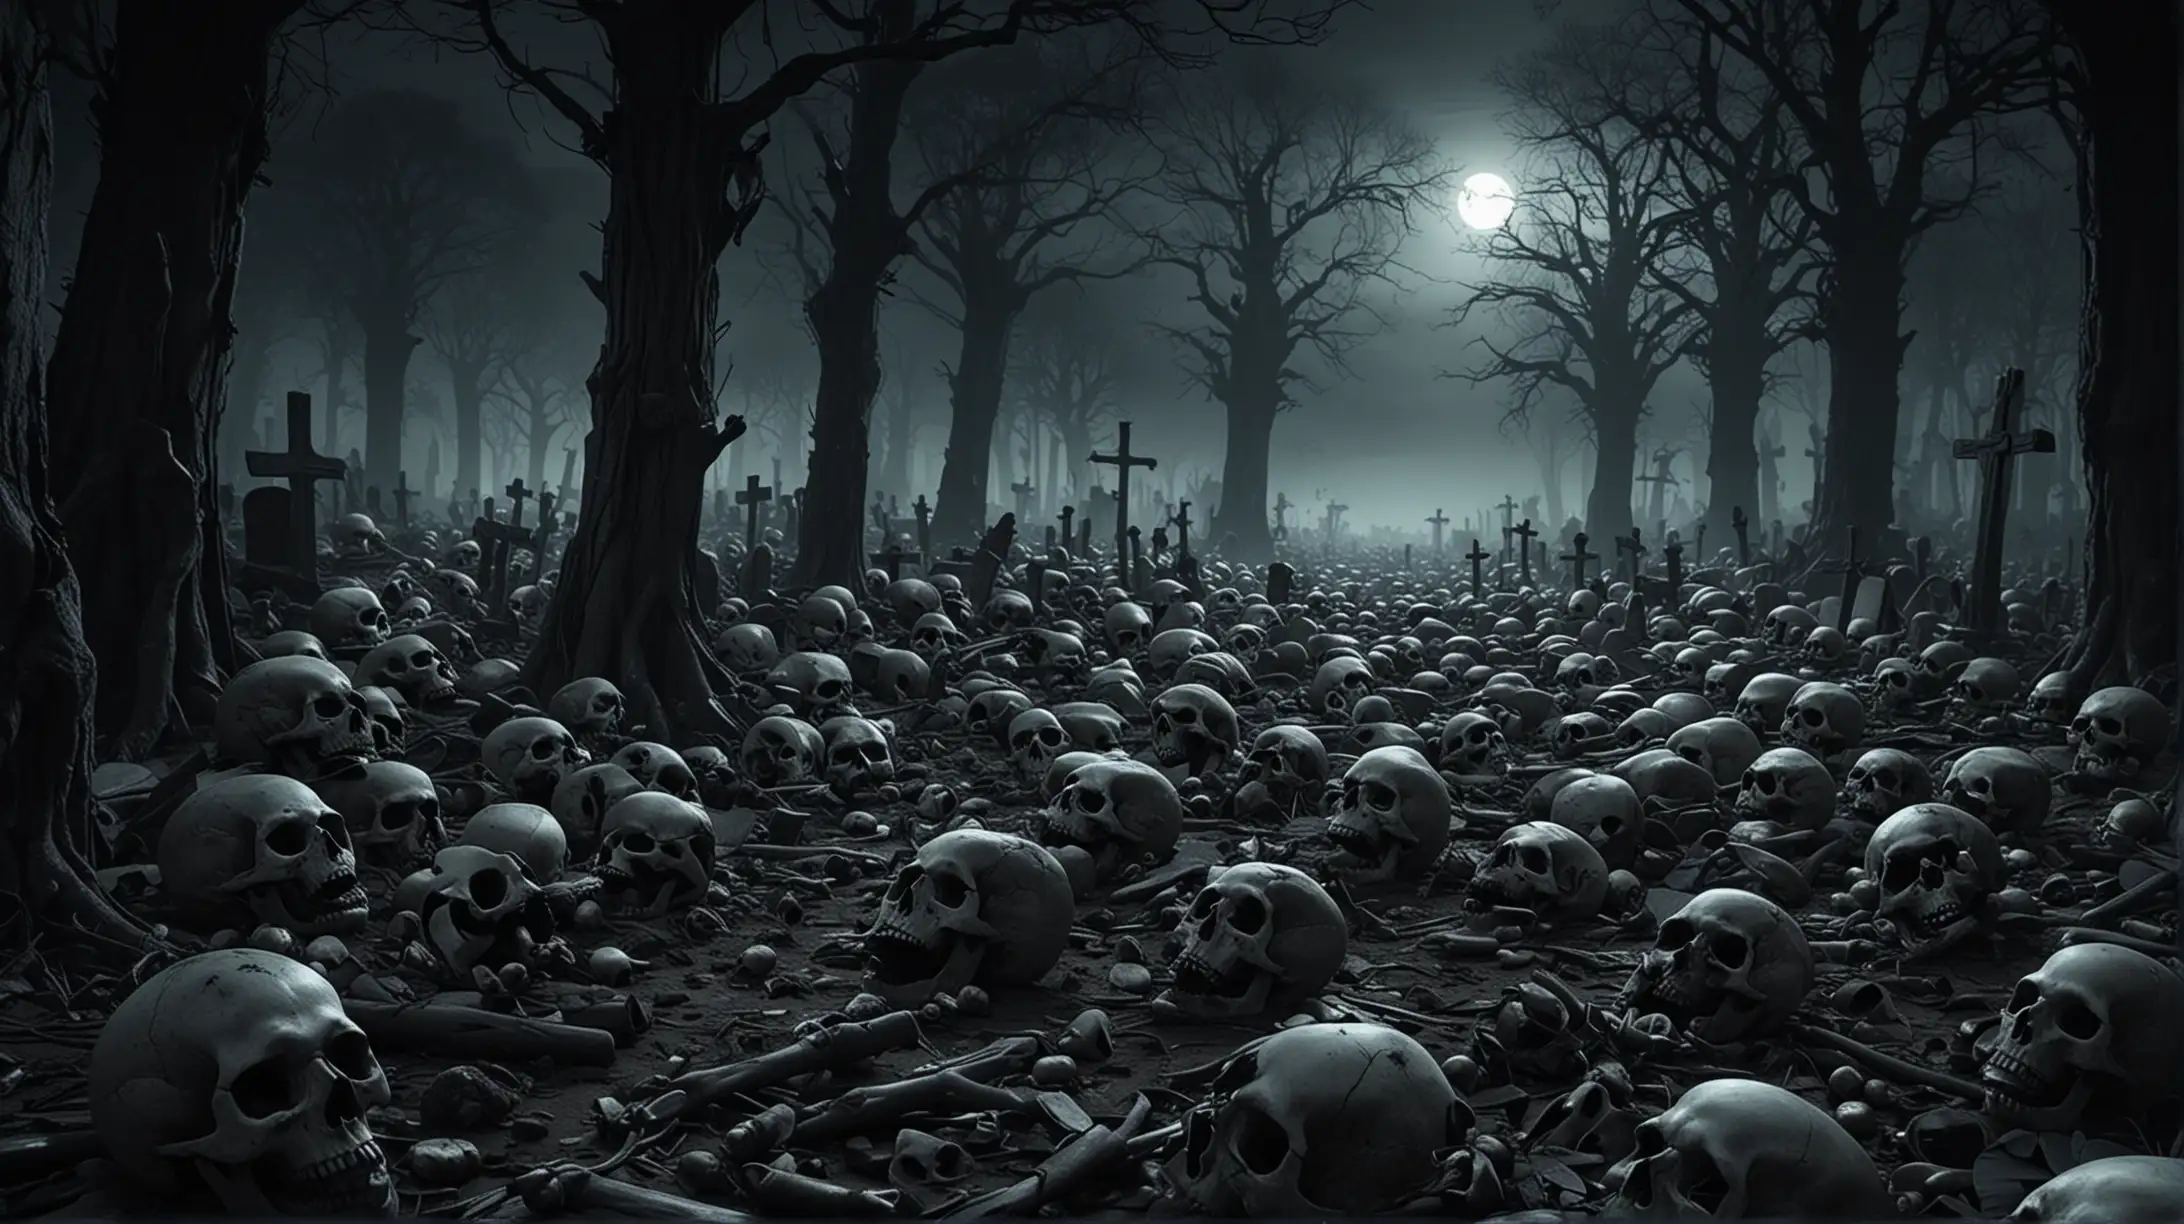 Make a mysterious and scary place, place full of skulls, cemetery of skulls, make it dark, very clear picture, 4k quality picture